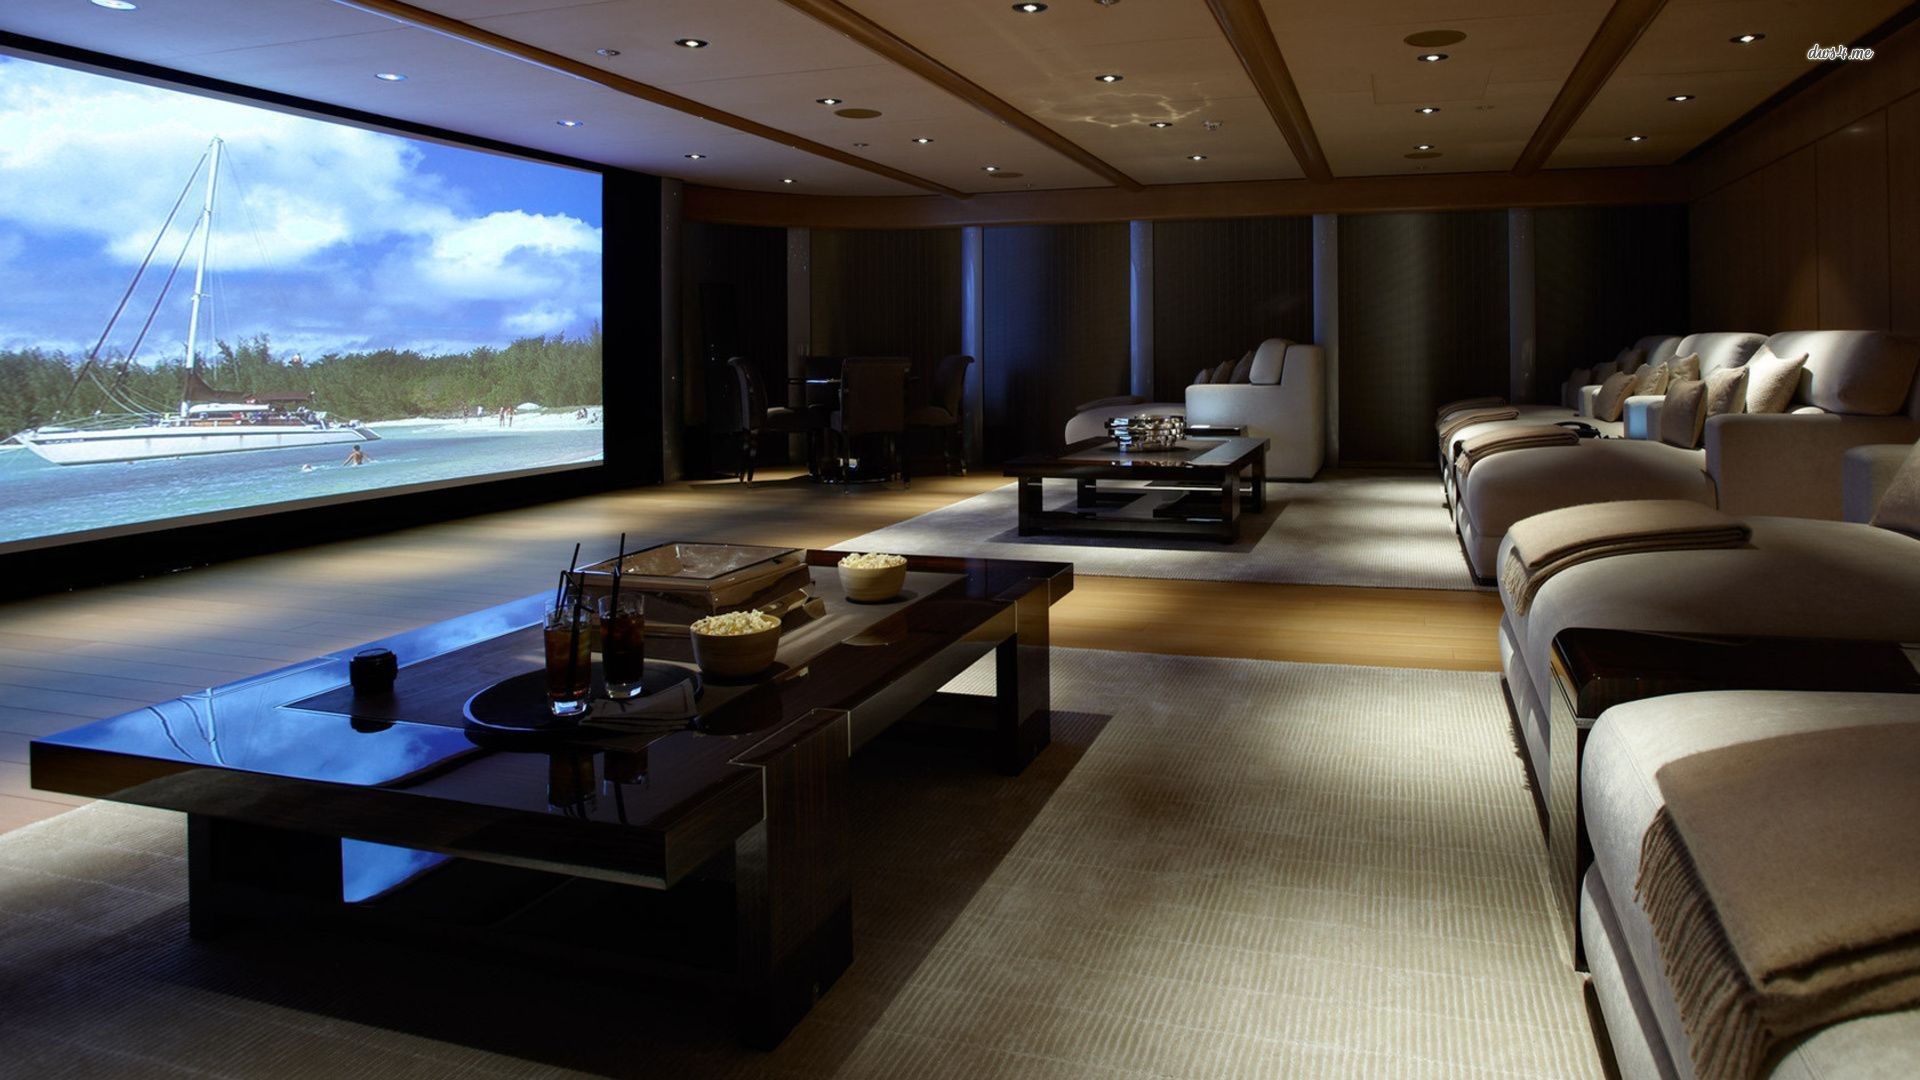 1920x1080 The best home theatre projectors in Perth